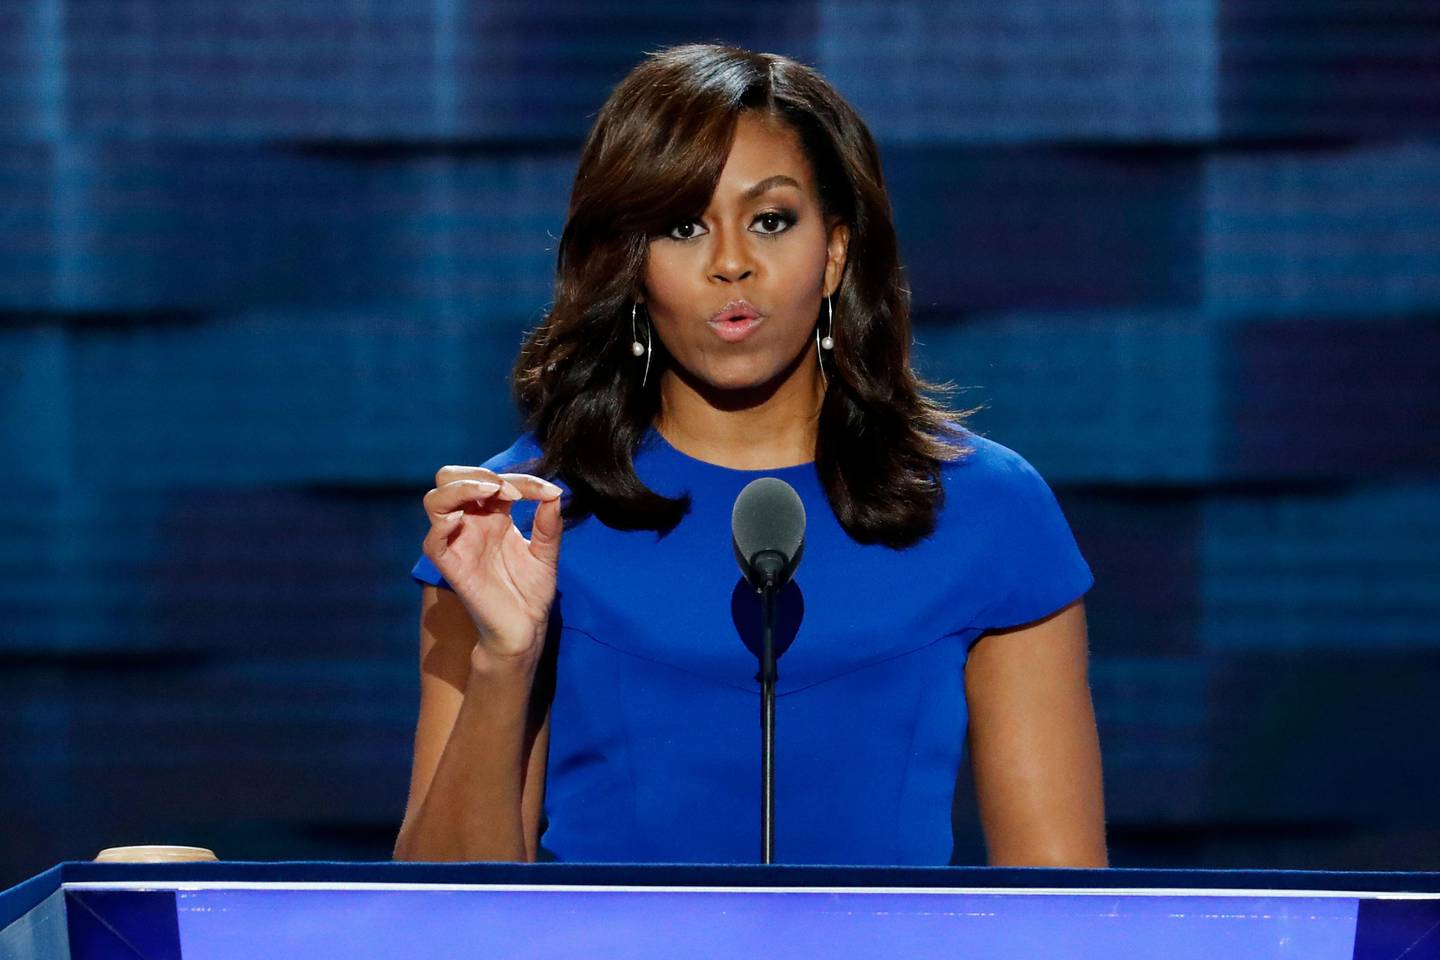 First Lady Michelle Obama speaks during the first day of the Democratic National Convention in Philadelphia , Monday, July 25, 2016. (AP Photo/J. Scott Applewhite)